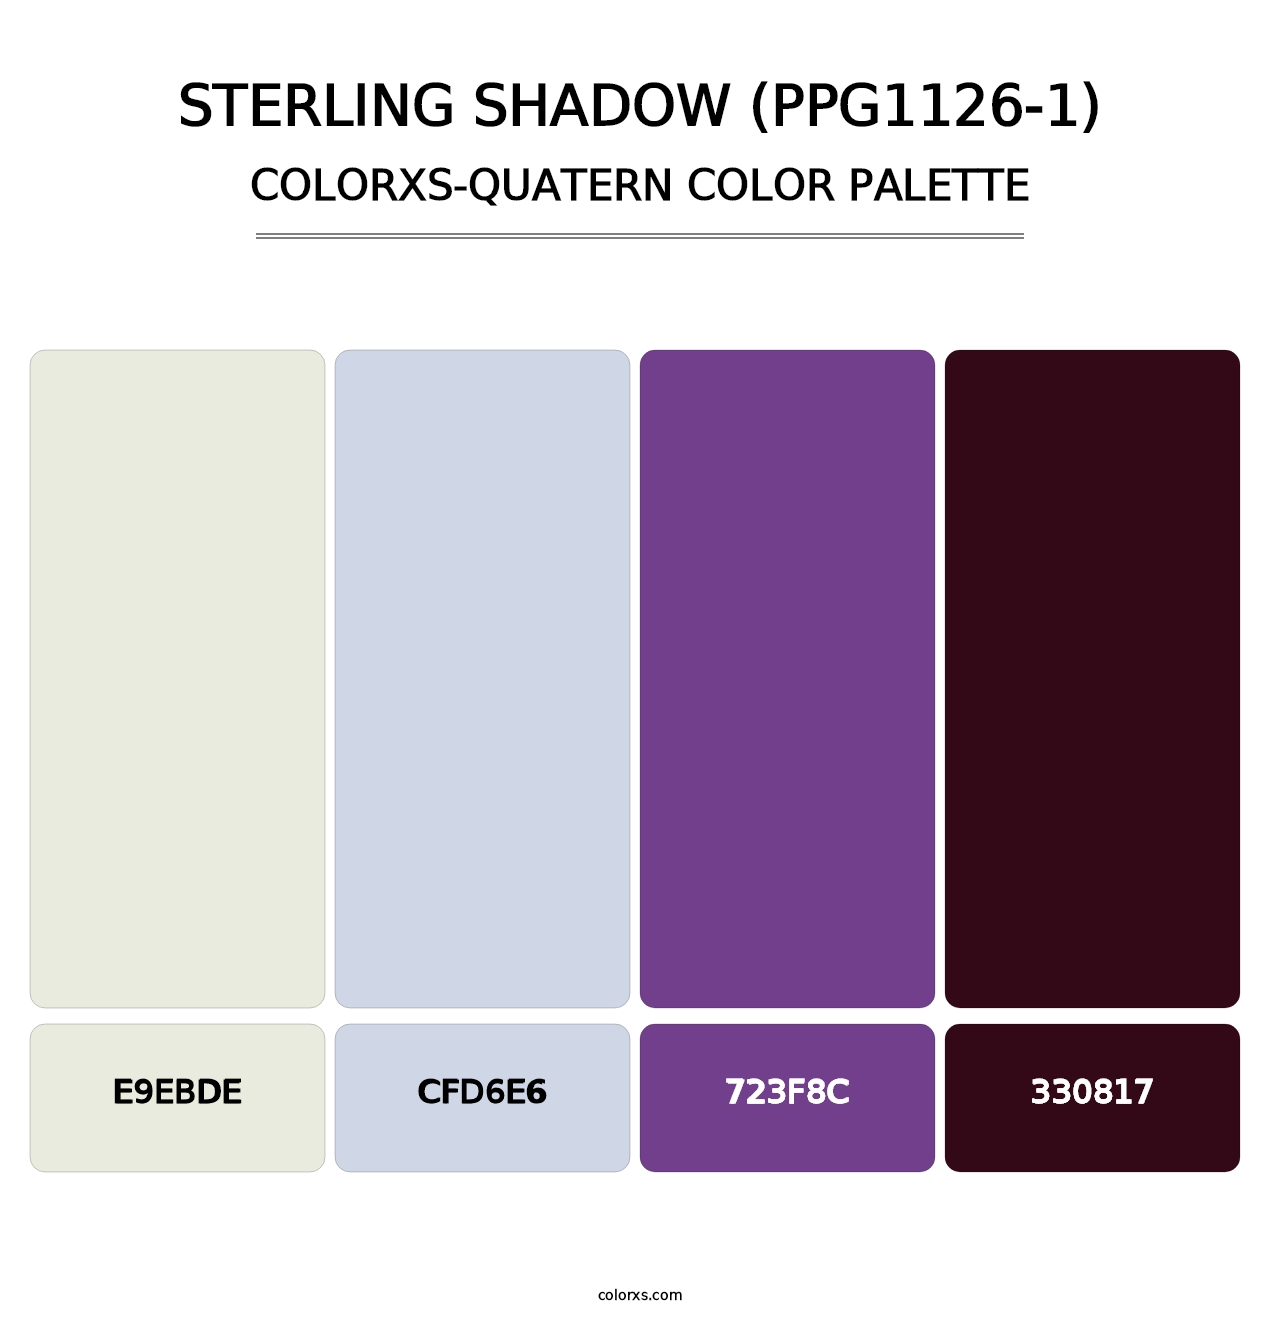 Sterling Shadow (PPG1126-1) - Colorxs Quatern Palette